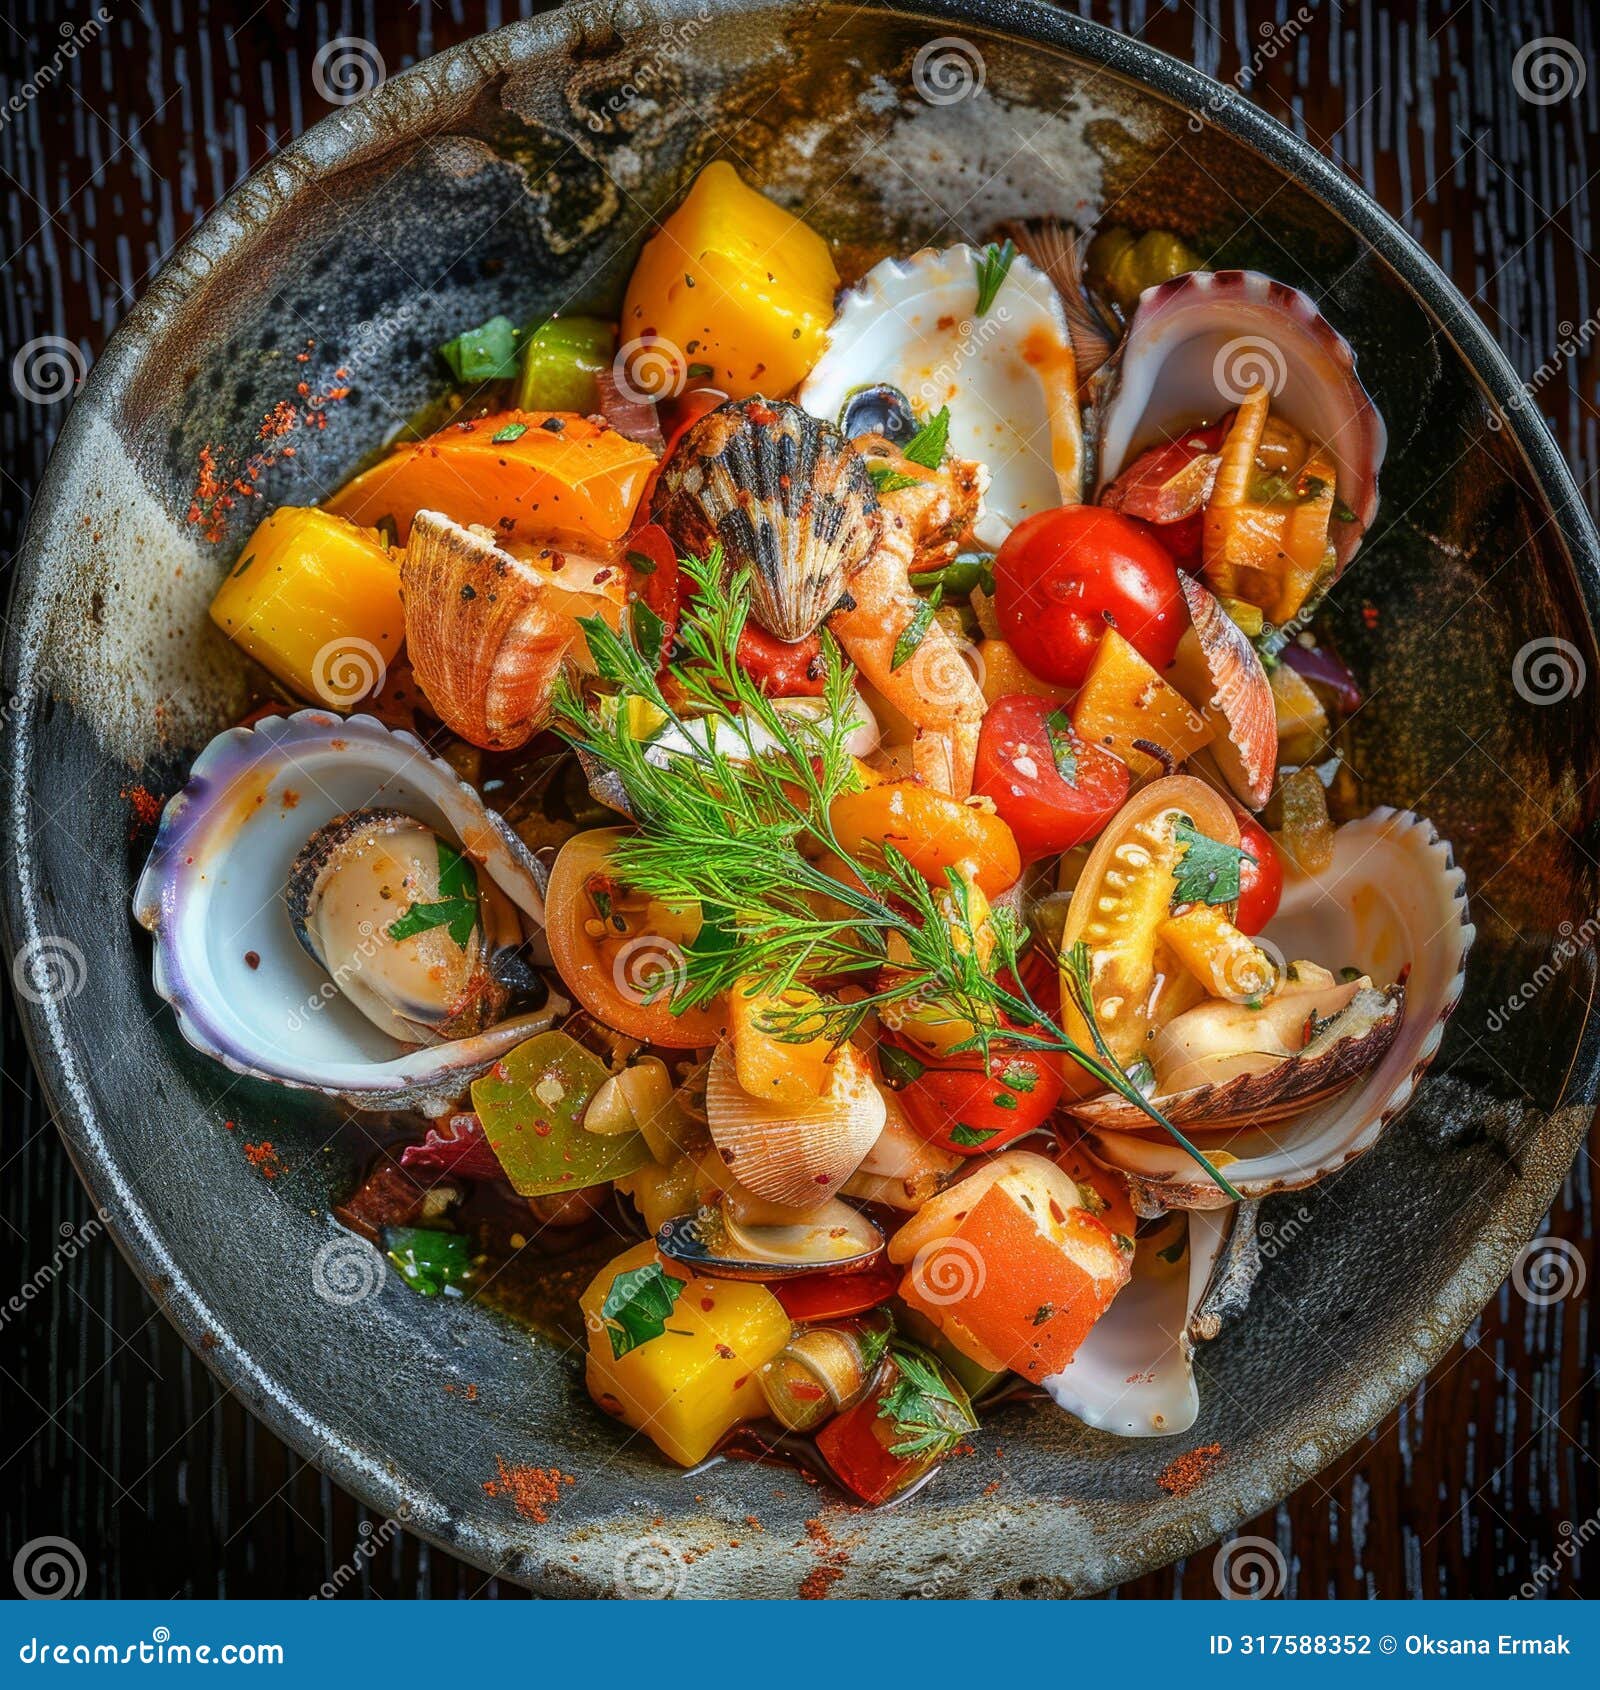 delicacy seafood dish with cooked seashells, bivalves or mytilus, tomatoes and mangoes salsa